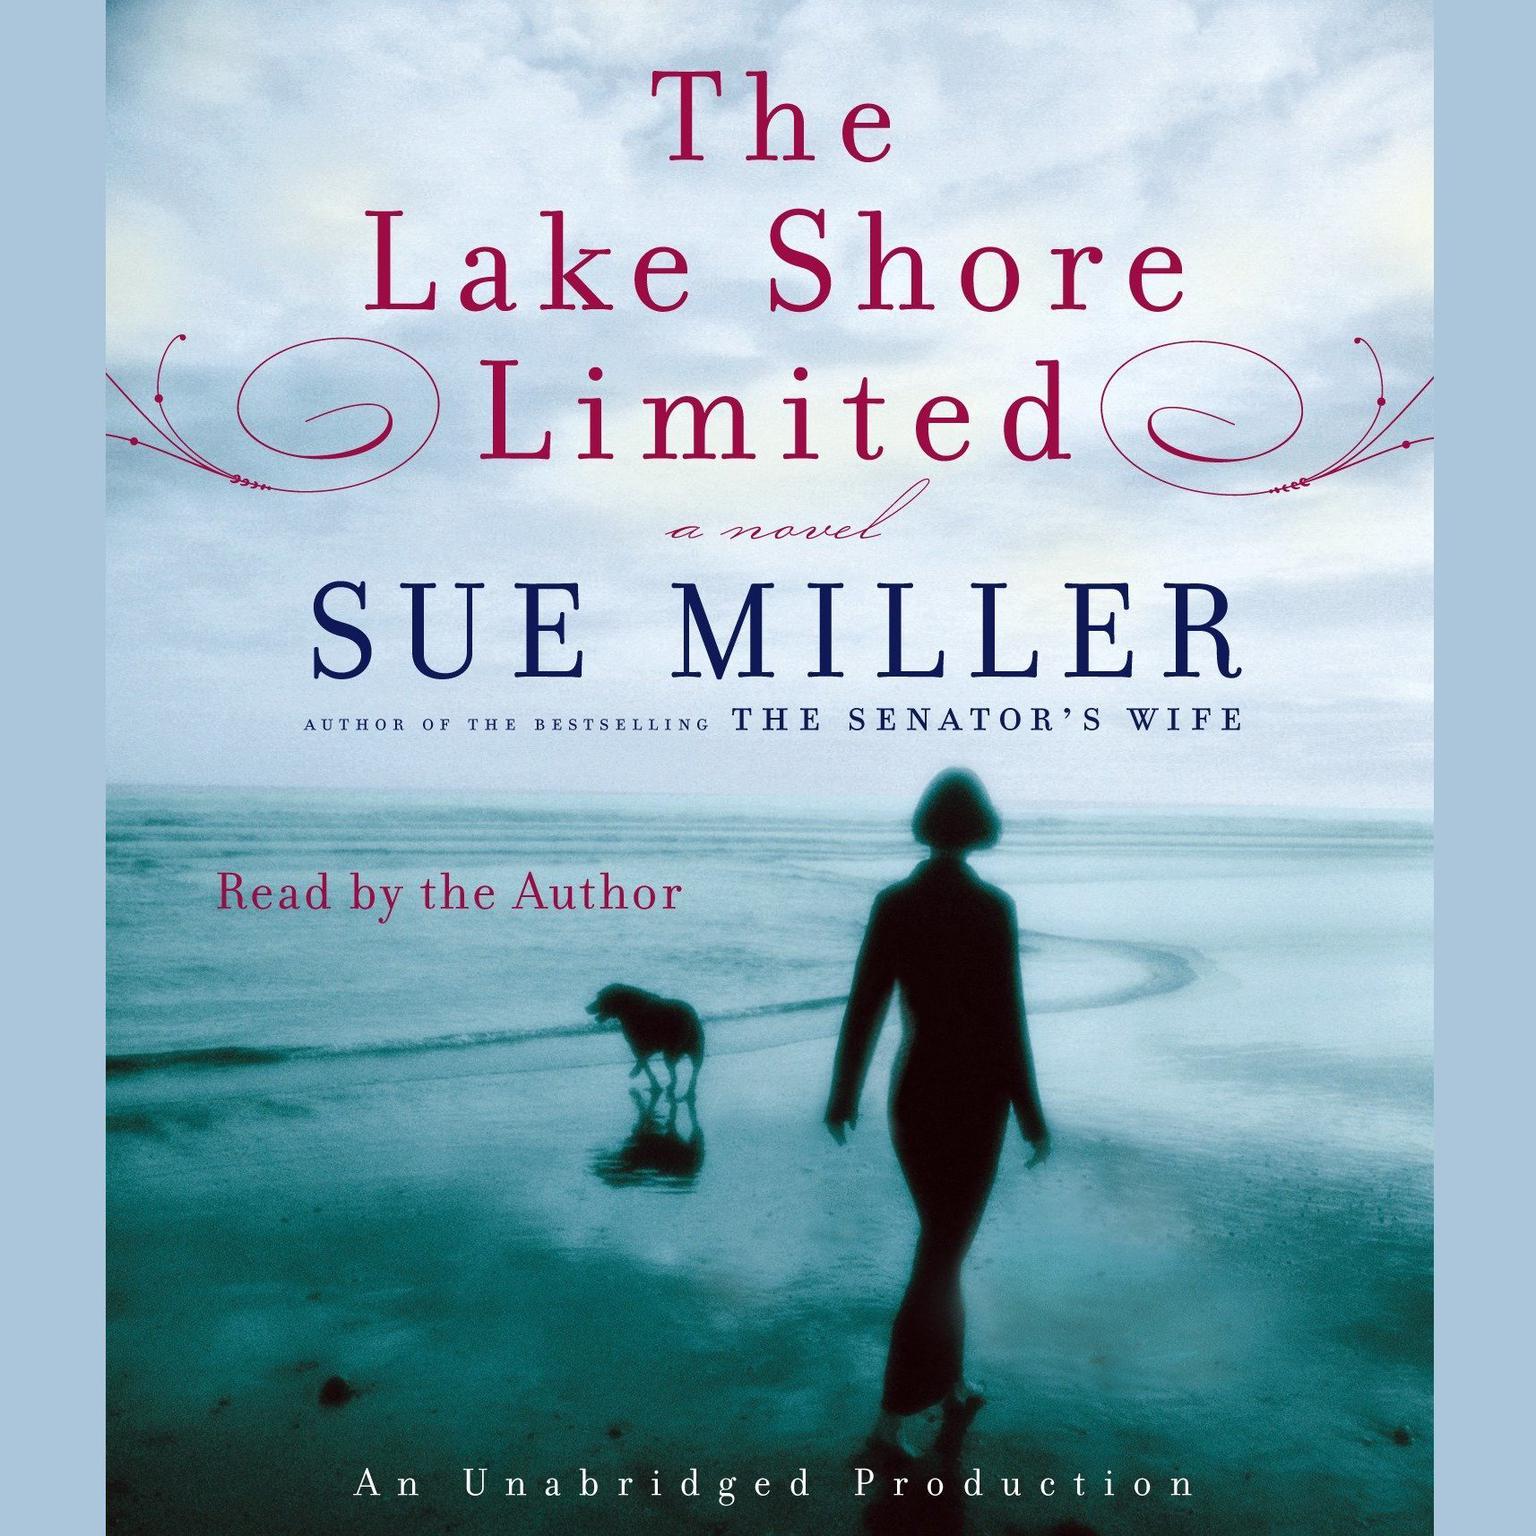 The Lake Shore Limited Audiobook, by Sue Miller